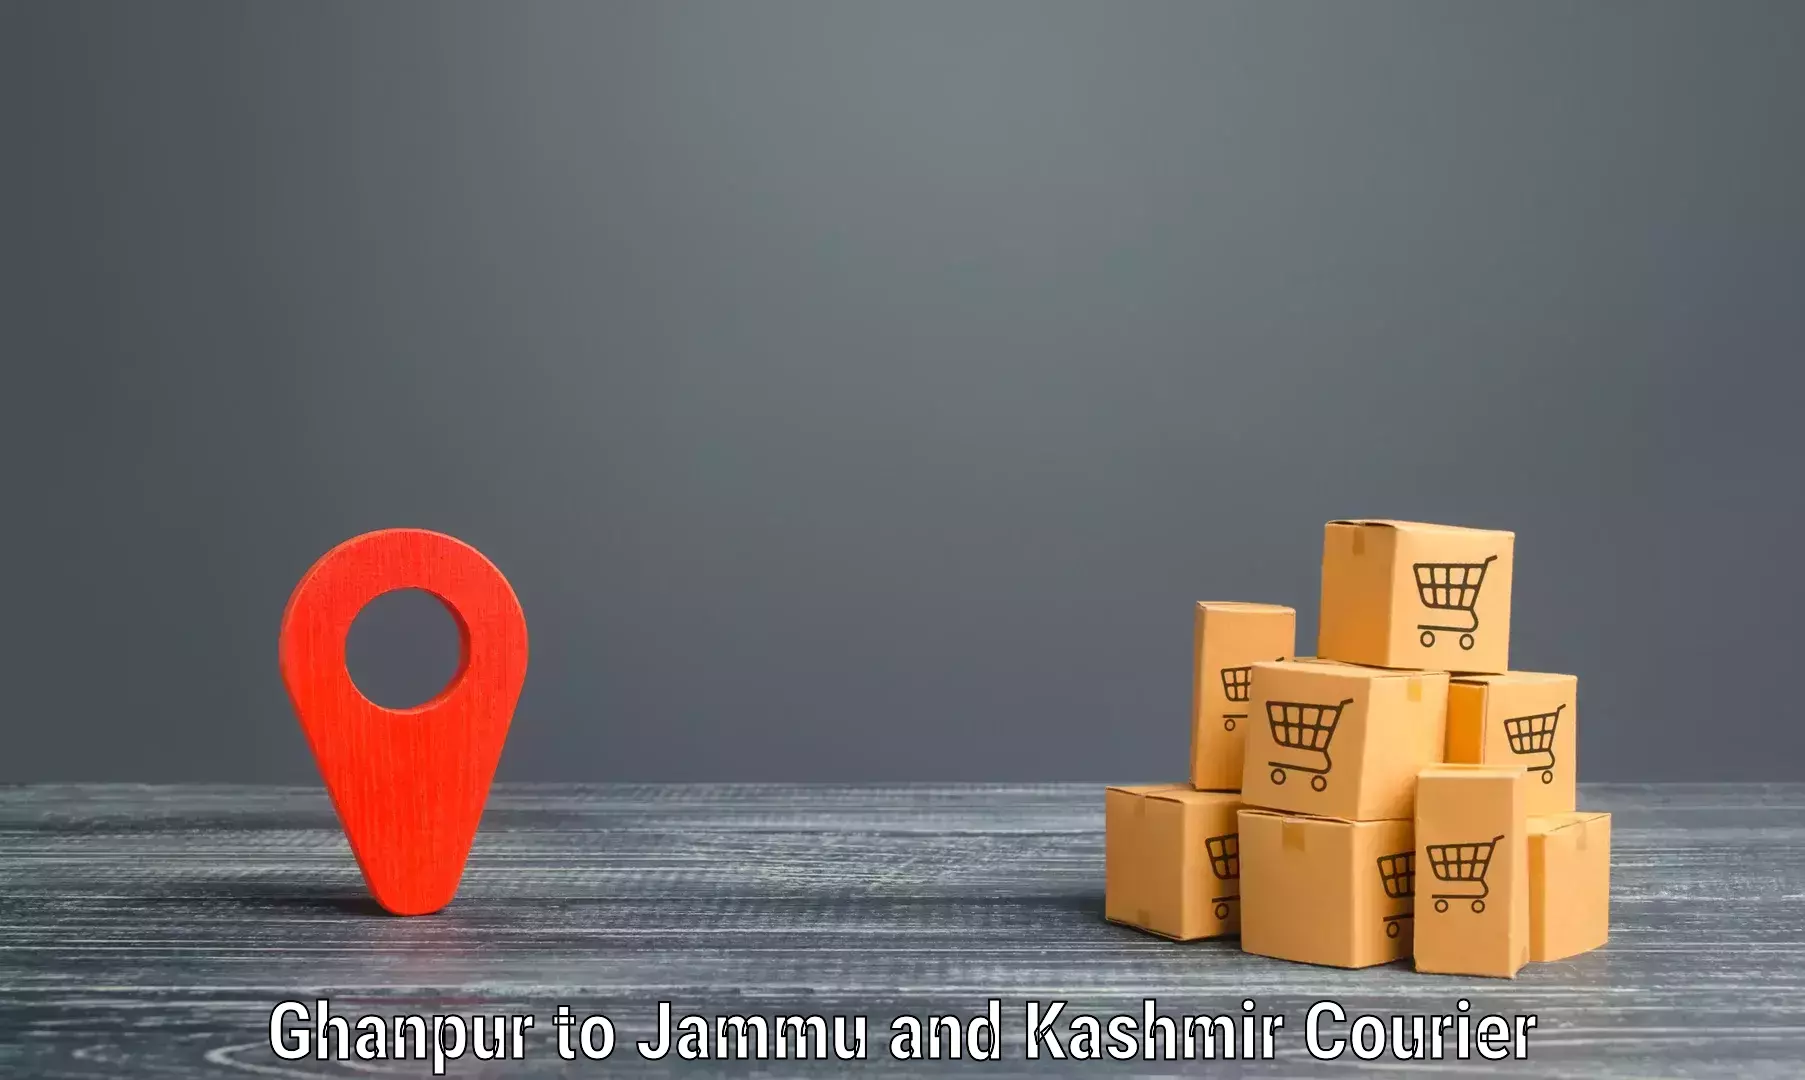 Courier service comparison Ghanpur to Jammu